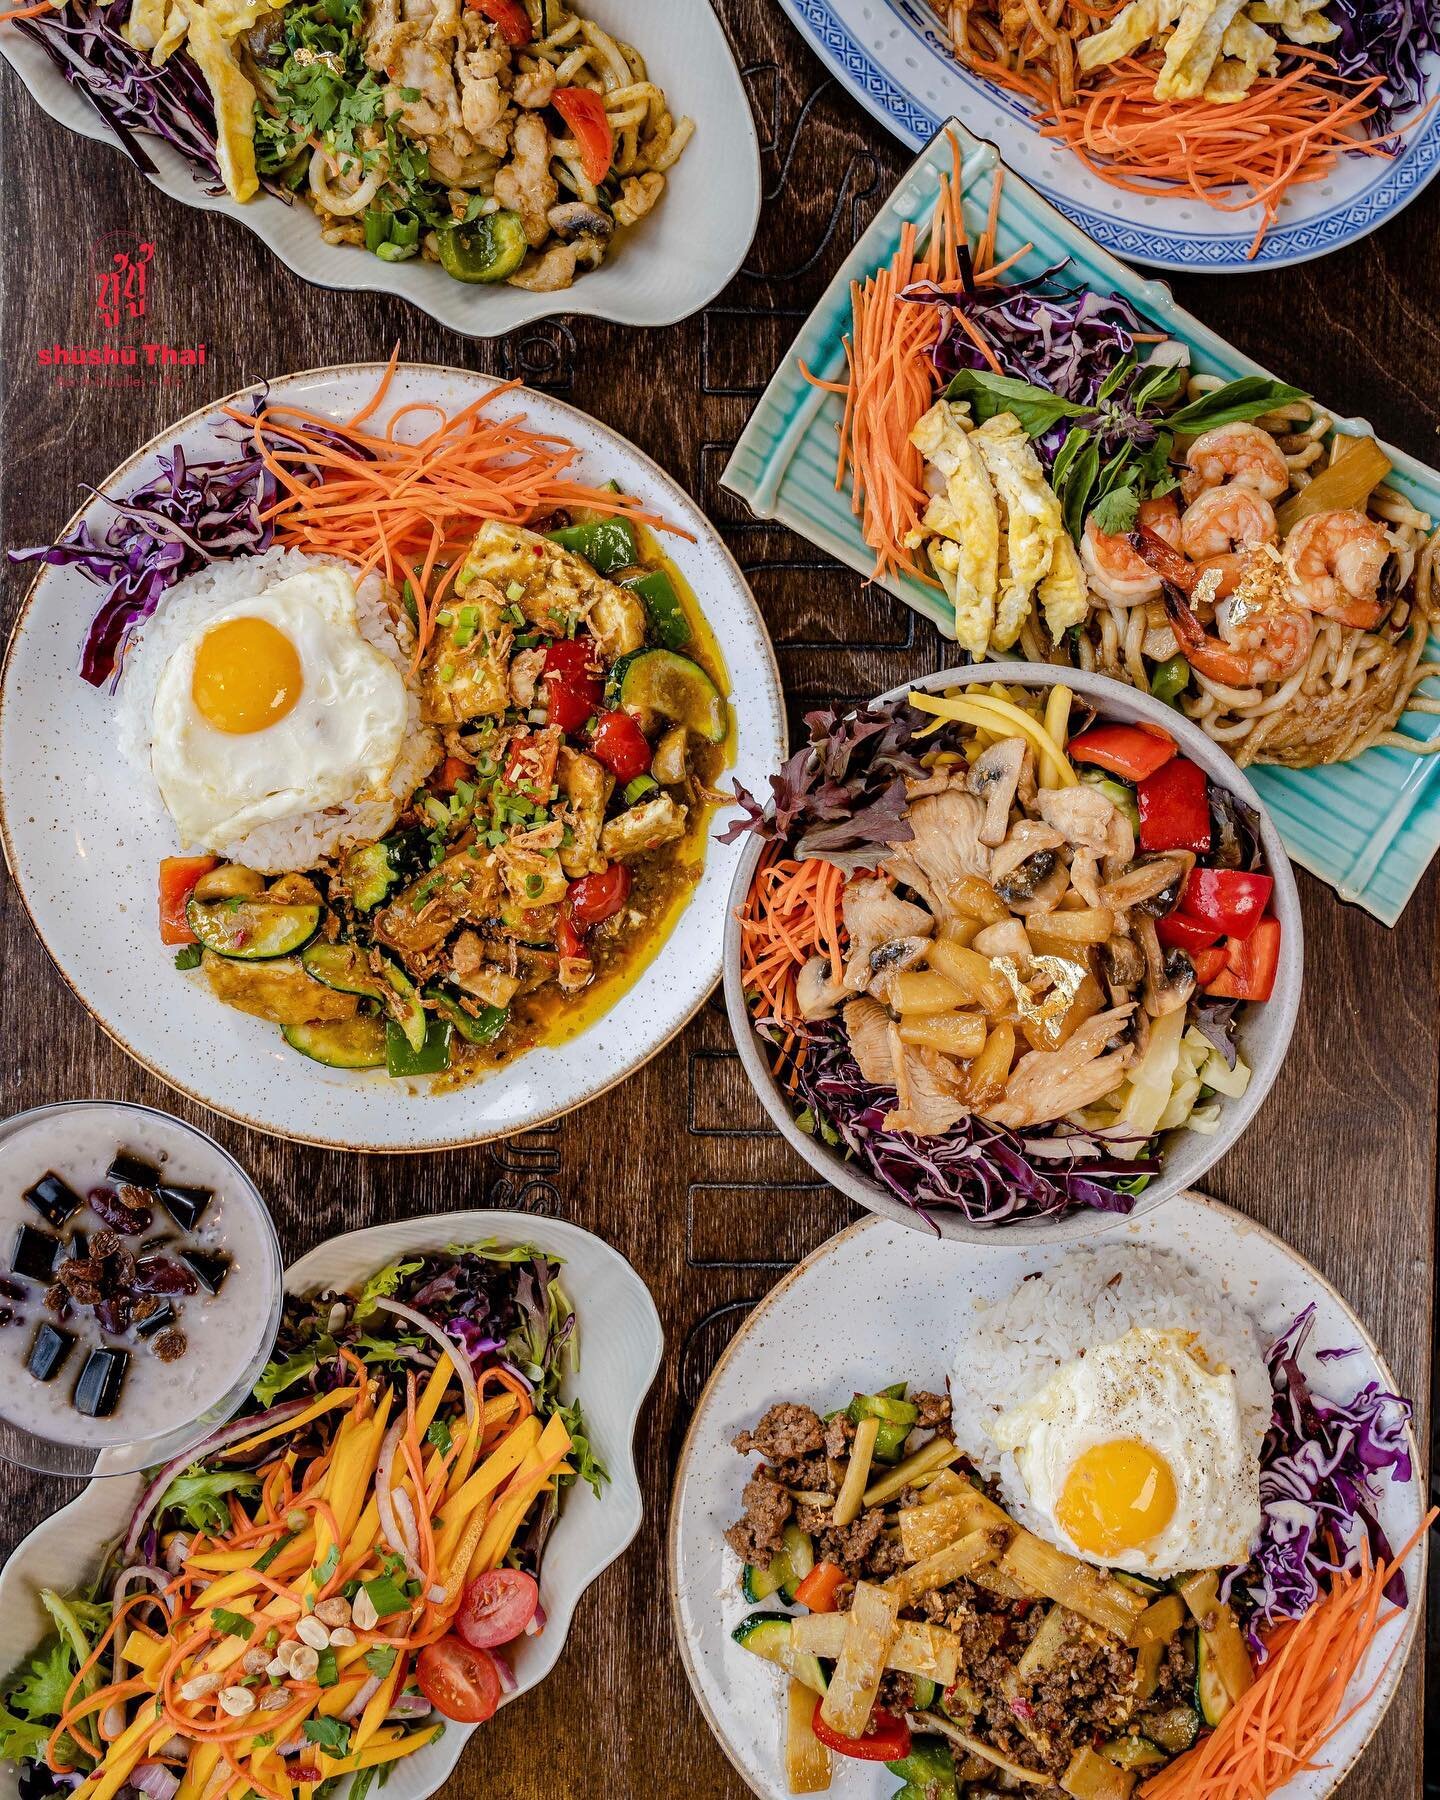 The sun is out ☀️ Come and dine in with us! 😘
.
.
.
.
.
#shushuthai #shushumontreal #thaifood #mtlthaifood #mtlmoments #mtlfoodie #mtlfood #mtlblog #foodporn #montreal #mtlblogger #foodie #happysaturday